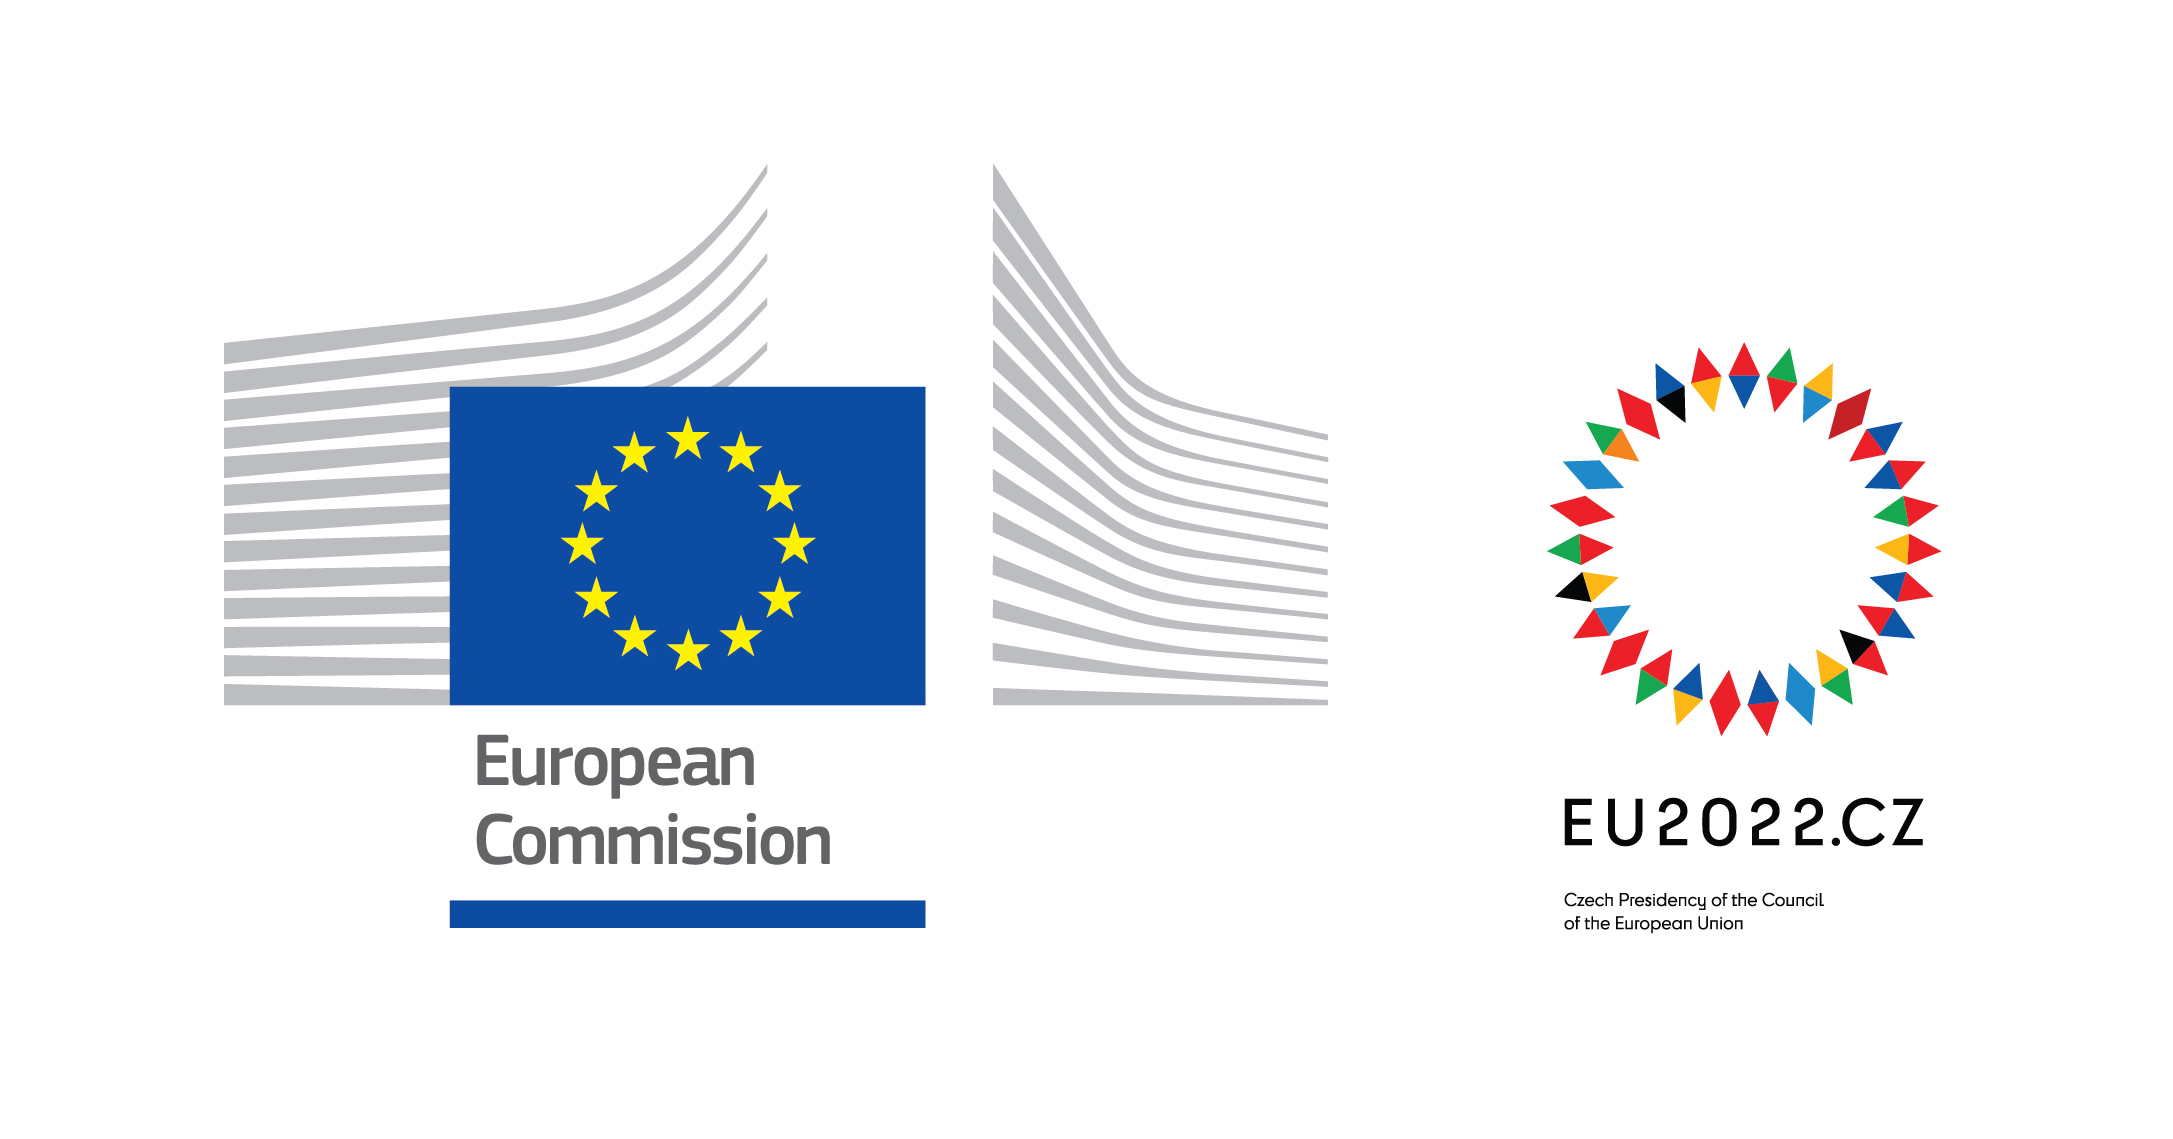 European Commission & Czech Presidency Council of the EU 2022 banner